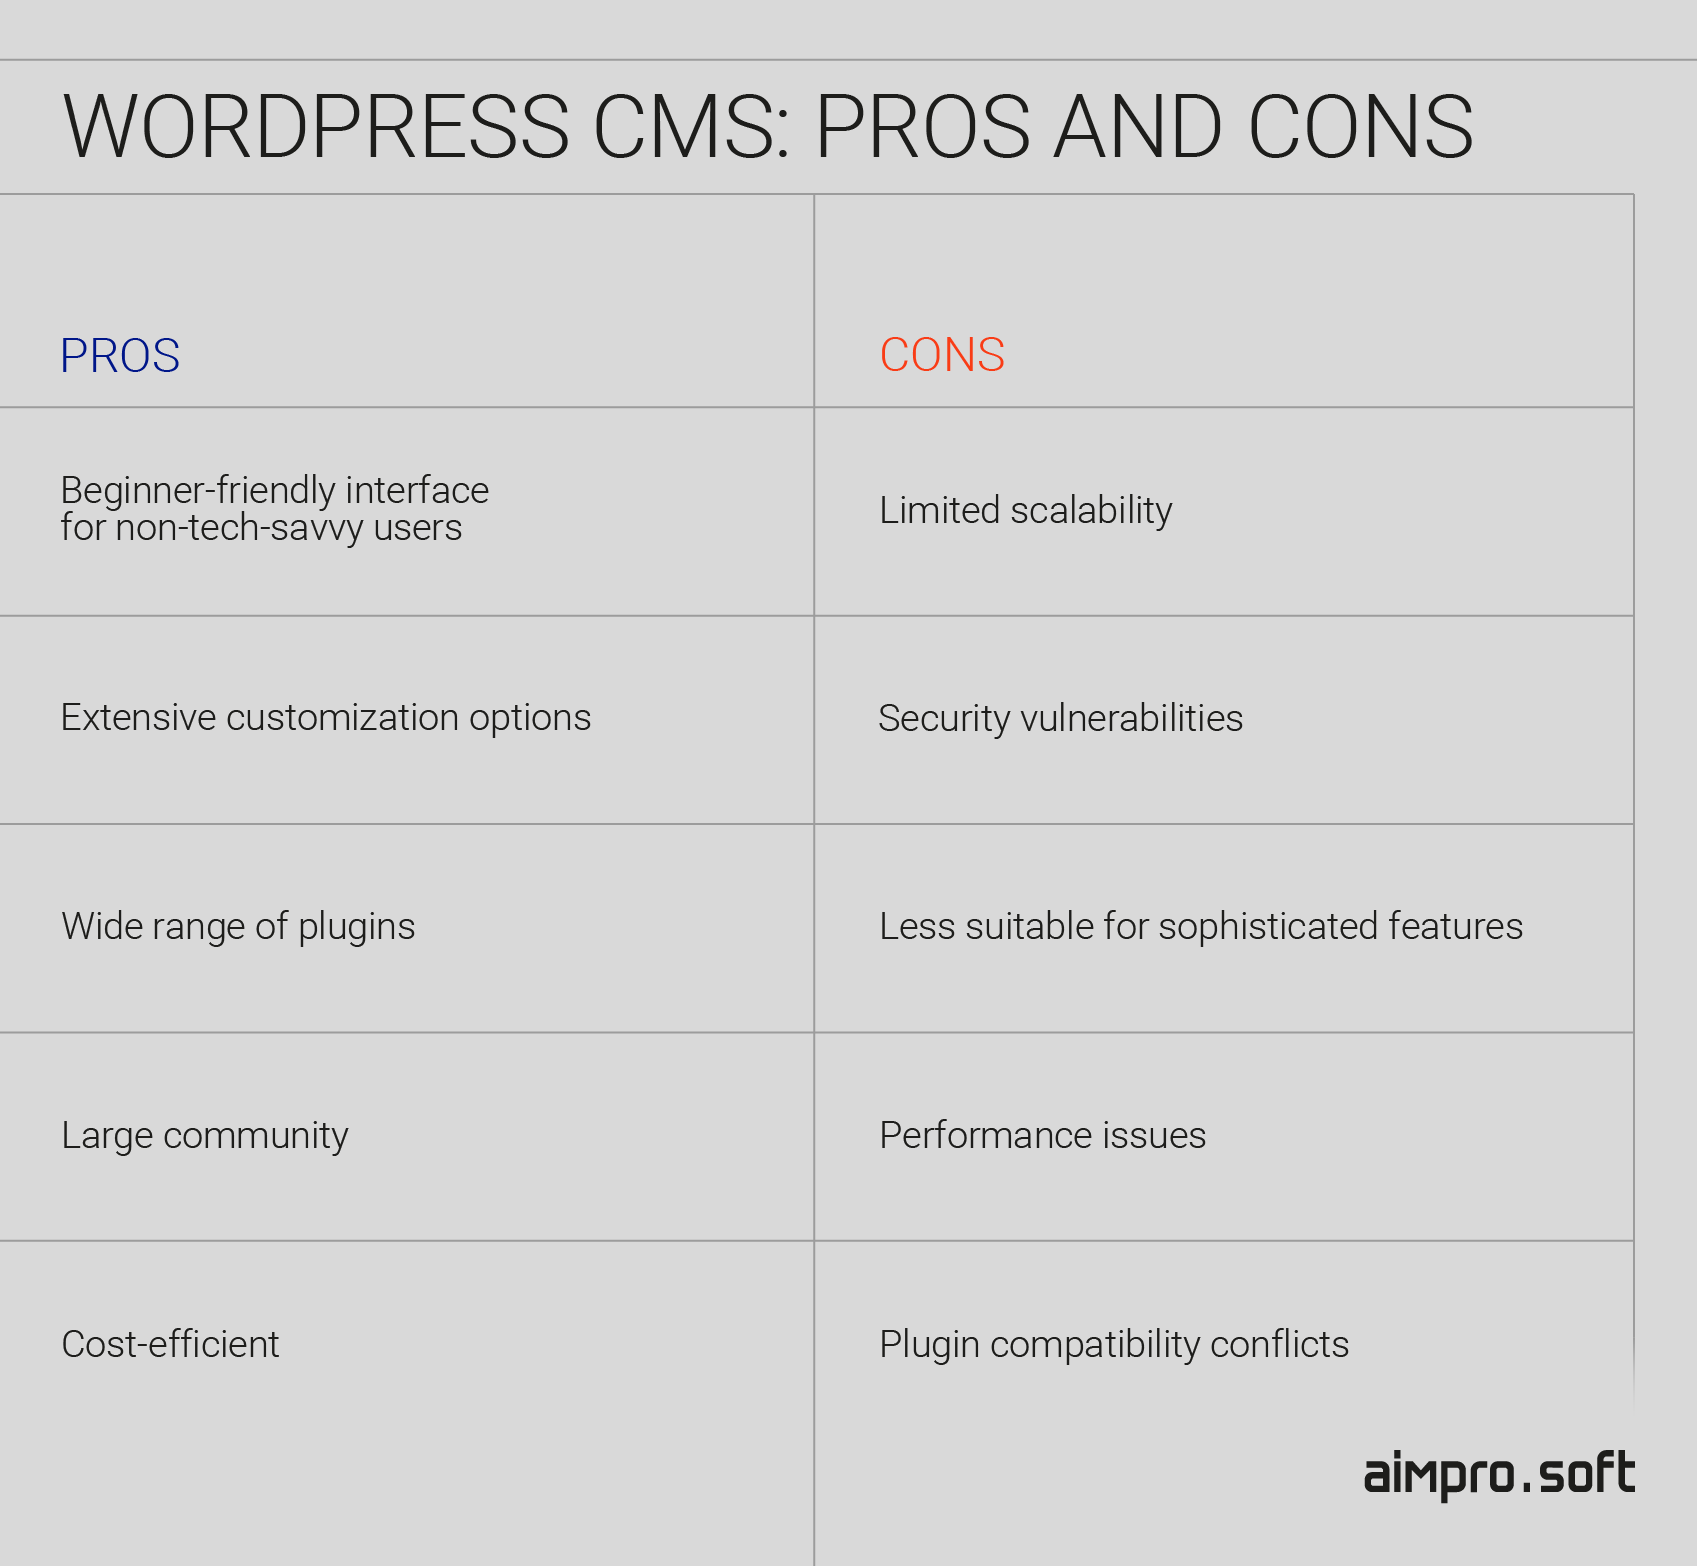 WordPress CMS pros and cons